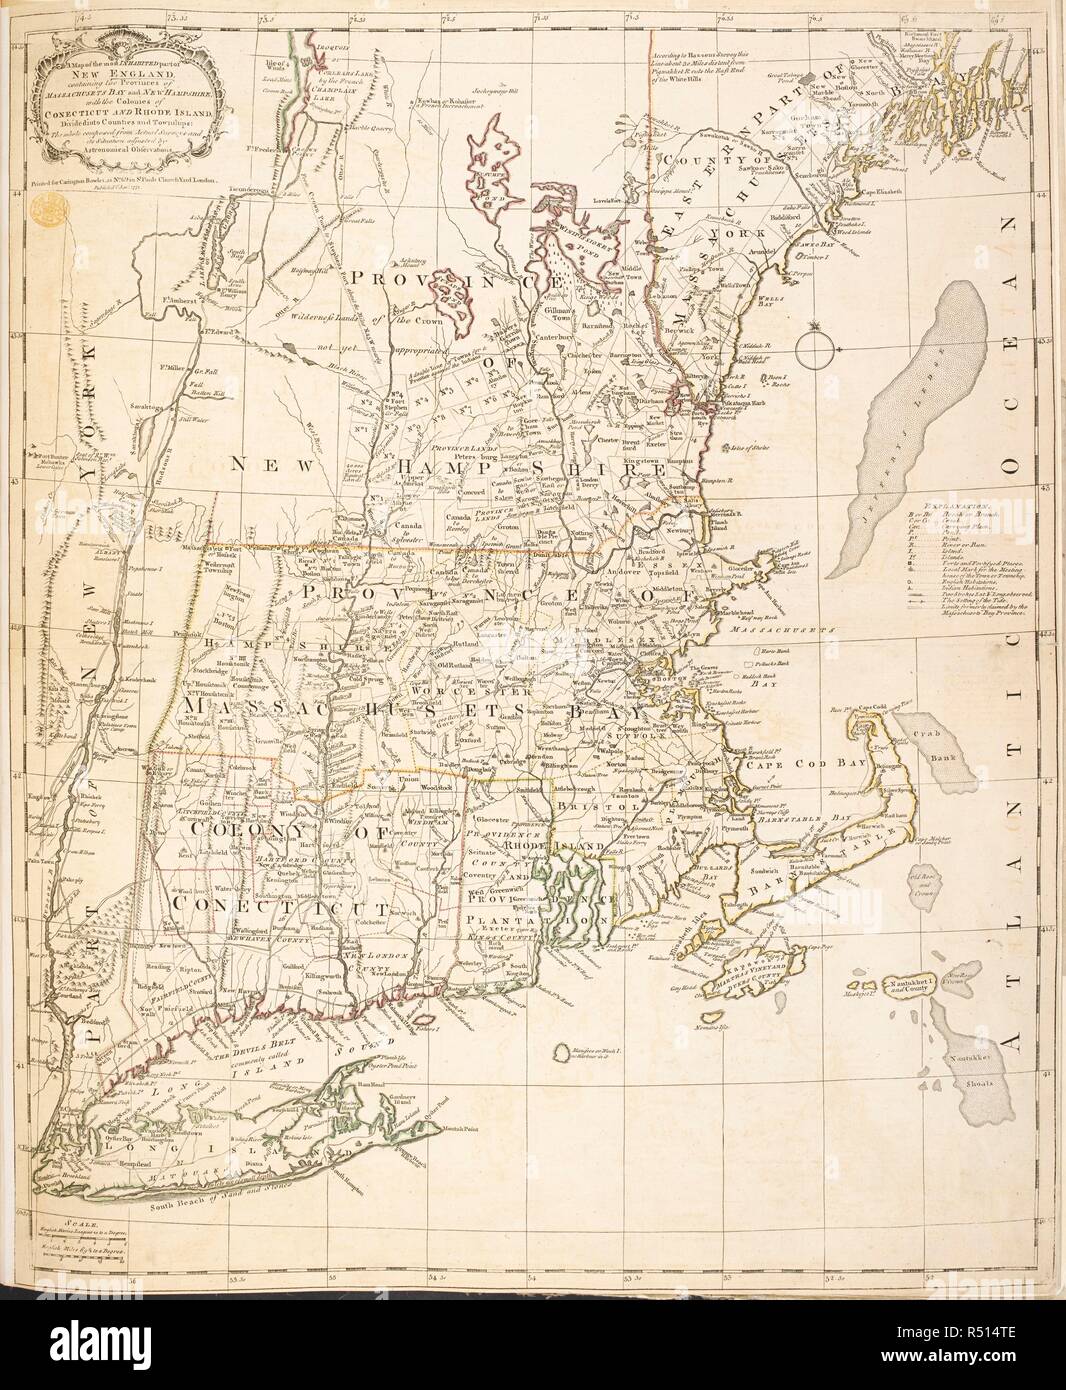 A map of New England. A Map of the most INHABITED parts of NEW ENGLAND, containing the Provinces of MASSACHUSETS BAY and NEW HAMPSHIRE, with the Colonies of CONECTICUT AND RHODE ISLAND, divided into Counties and Townships: The whole composed from Actual Surveys and its Situation adjusted by Astronomical Observations. [London] : Printed for Carington Bowles at at No. 69 in St. Pauls ChurchYard London, publish'd 1st Jany. 1771. Source: Maps K.Top.120.17. Language: English. Stock Photo